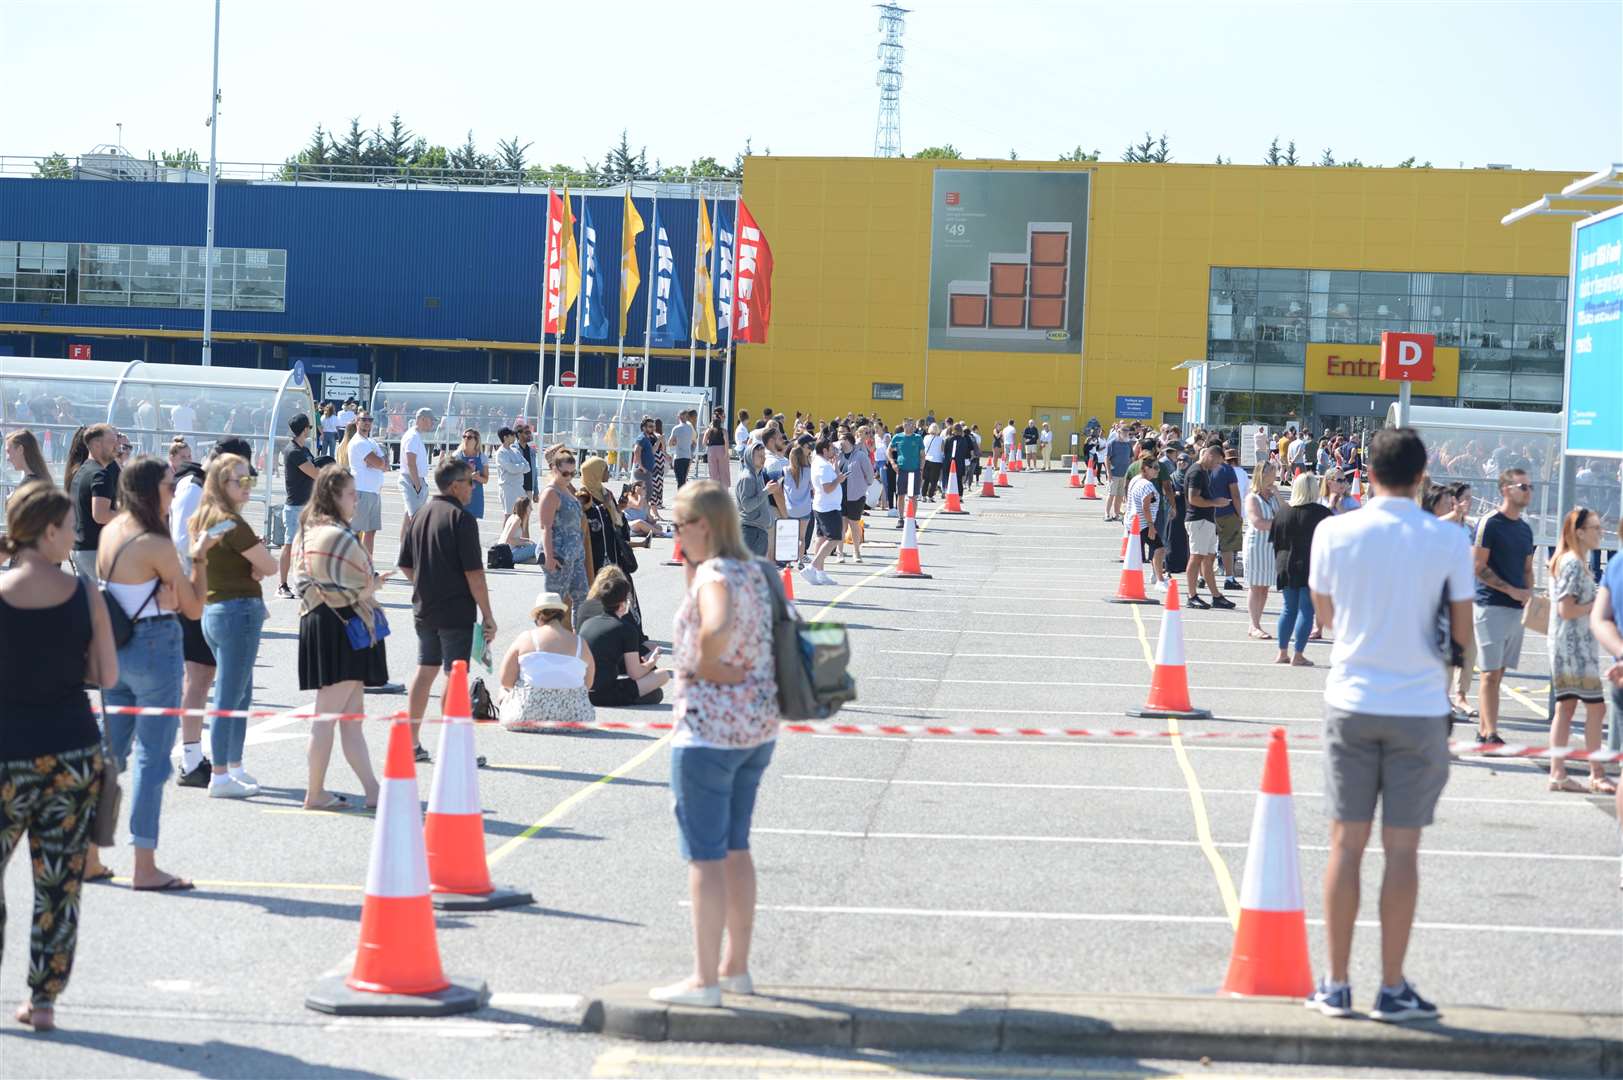 Customers queued two metres apart to get inside Ikea in Lakeside, Essex (Nick Ansell/PA)